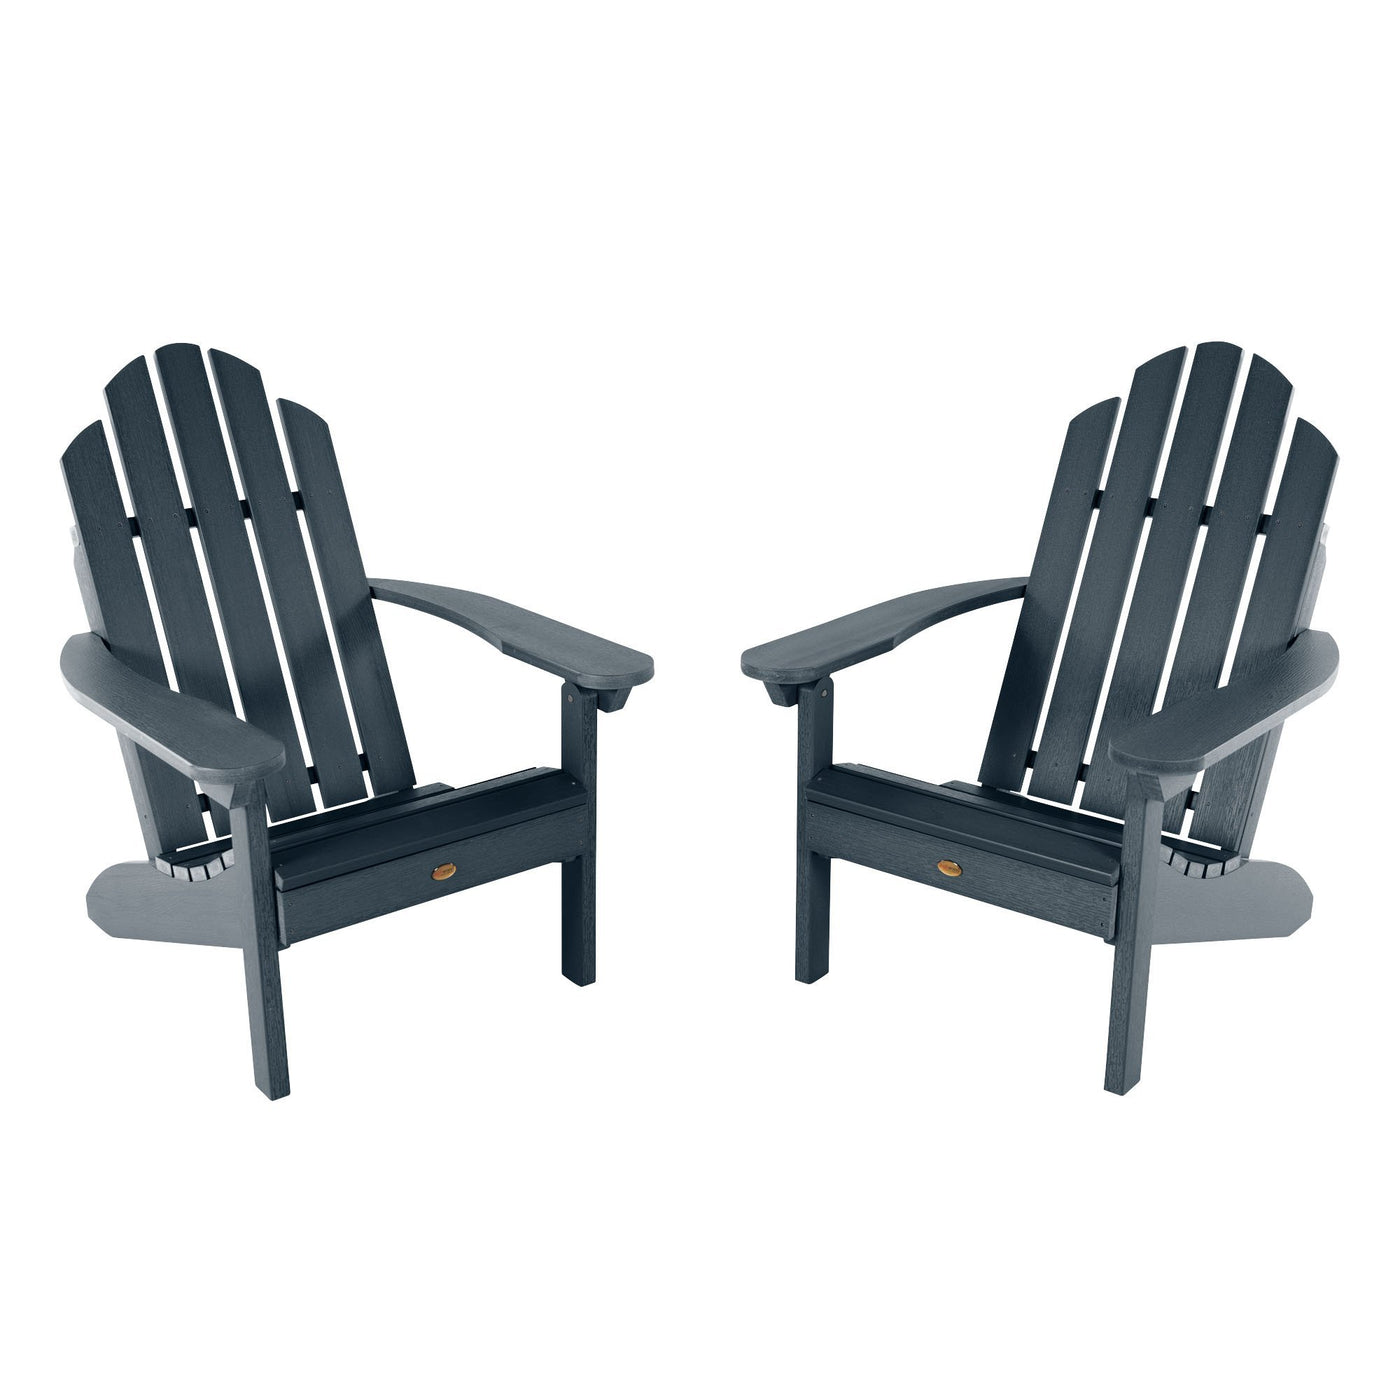 Set of Two Classic Westport Adirondack Chairs Highwood USA Federal Blue 